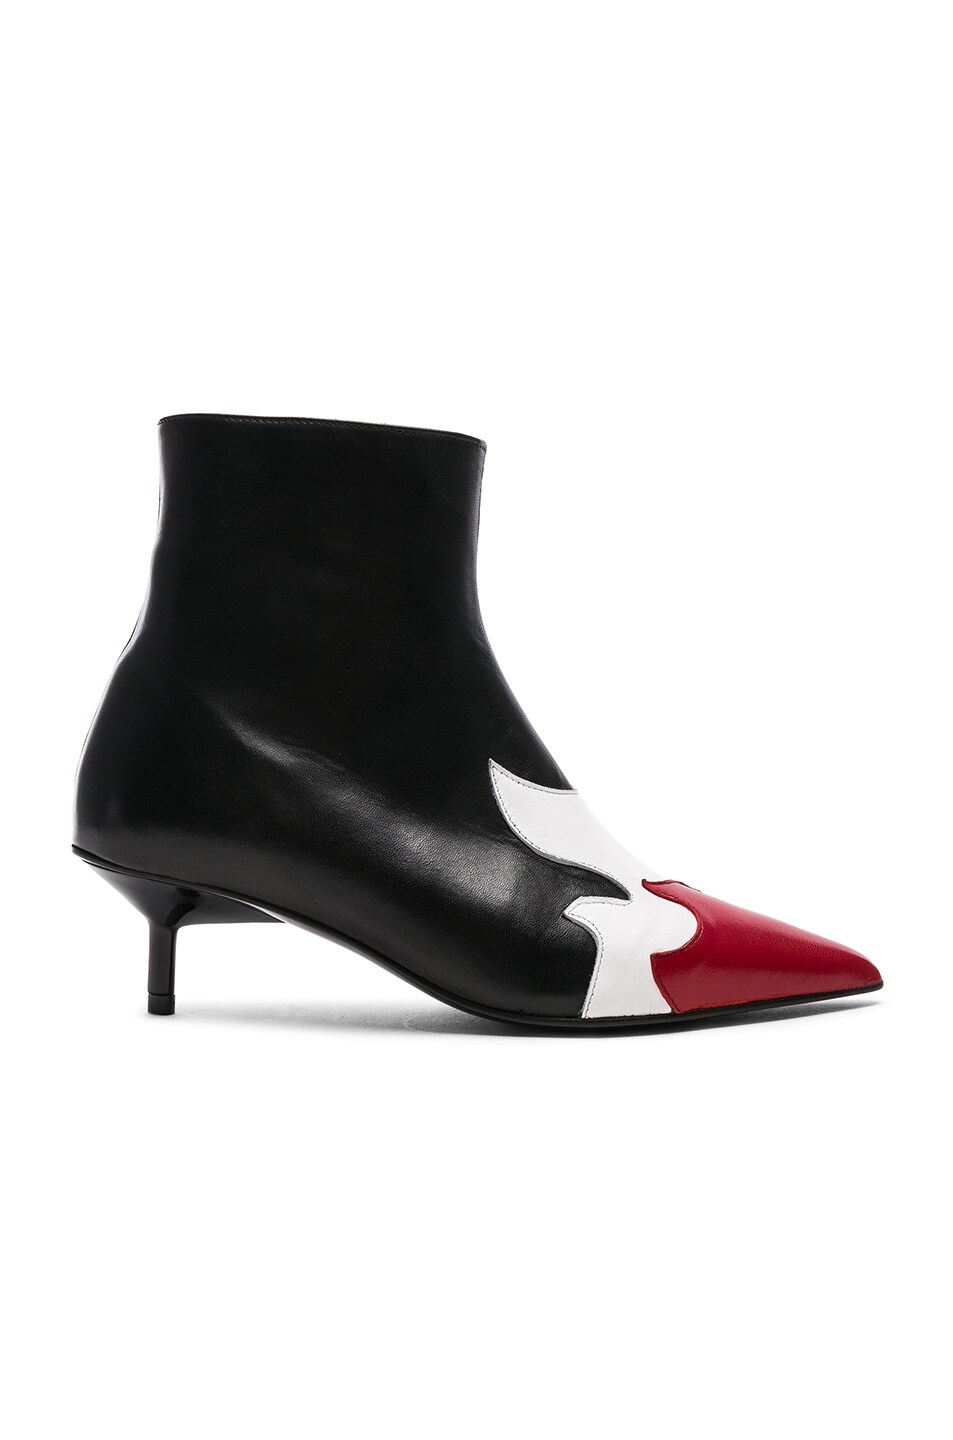 Image 1 of Marques ' Almeida Pointy Kitten Heel Flame Boot in Black, White & Red